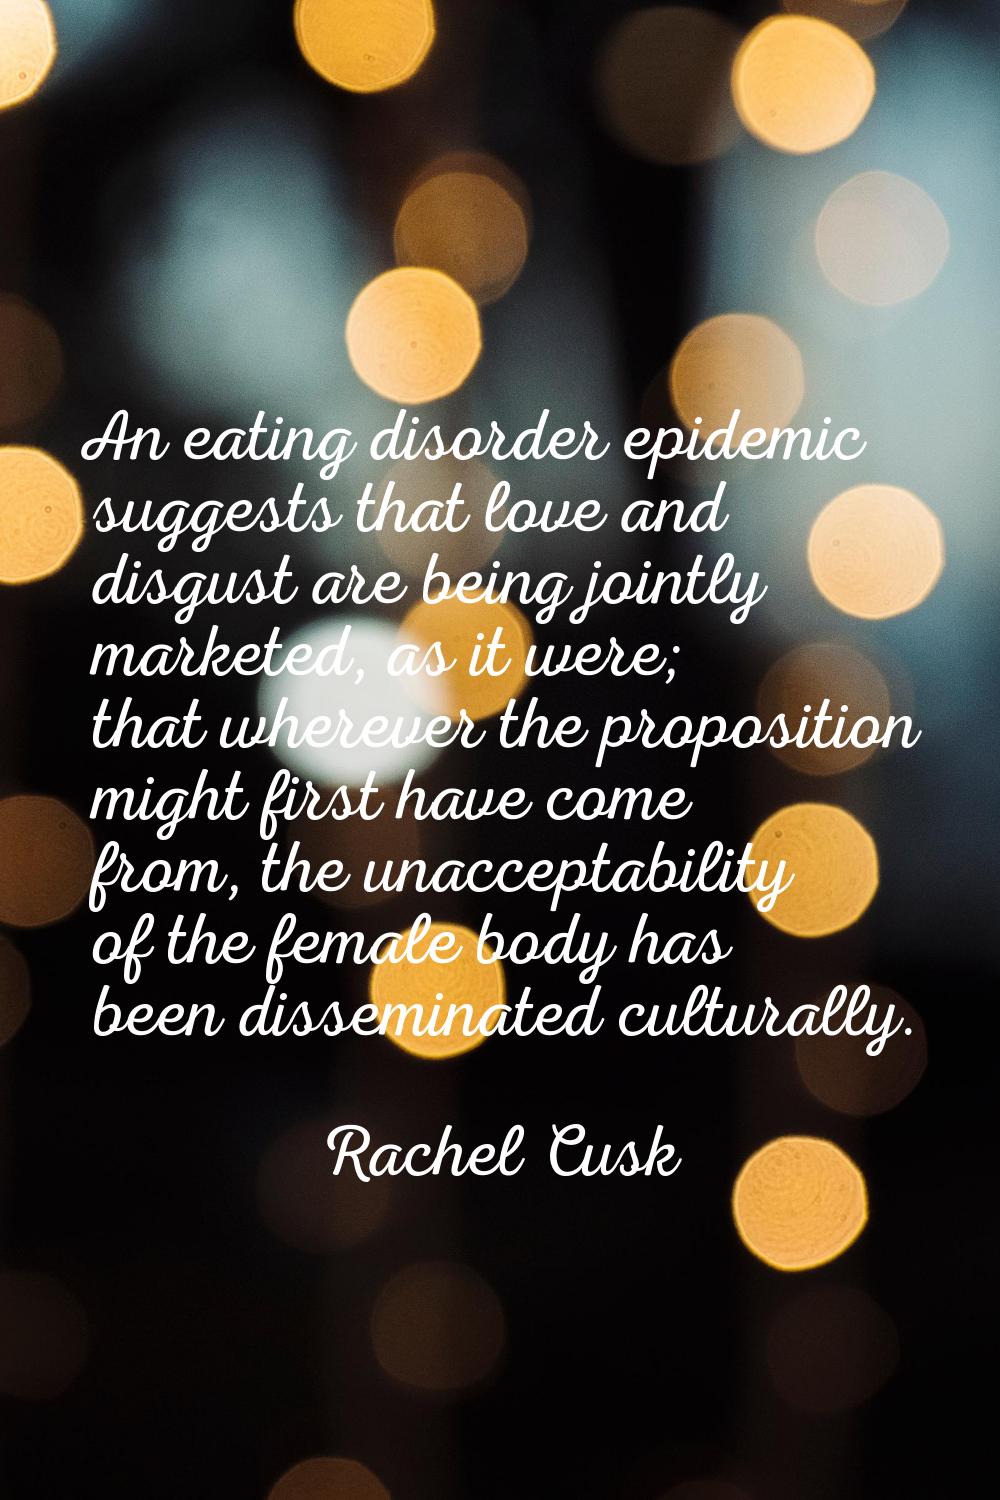 An eating disorder epidemic suggests that love and disgust are being jointly marketed, as it were; 